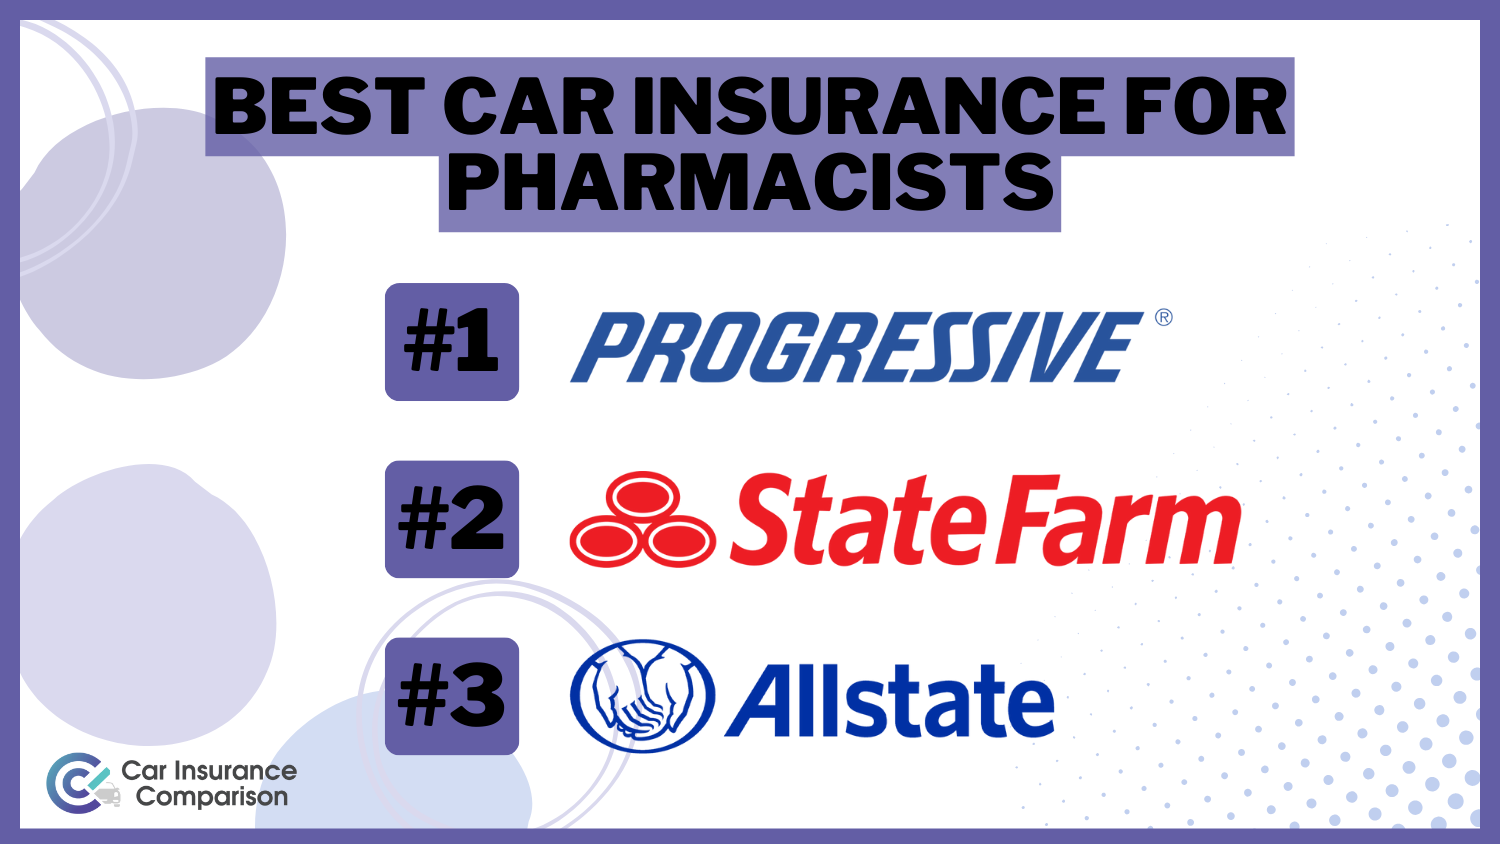 Best Car Insurance for Pharmacists: Progressive, State Farm, and Allstate